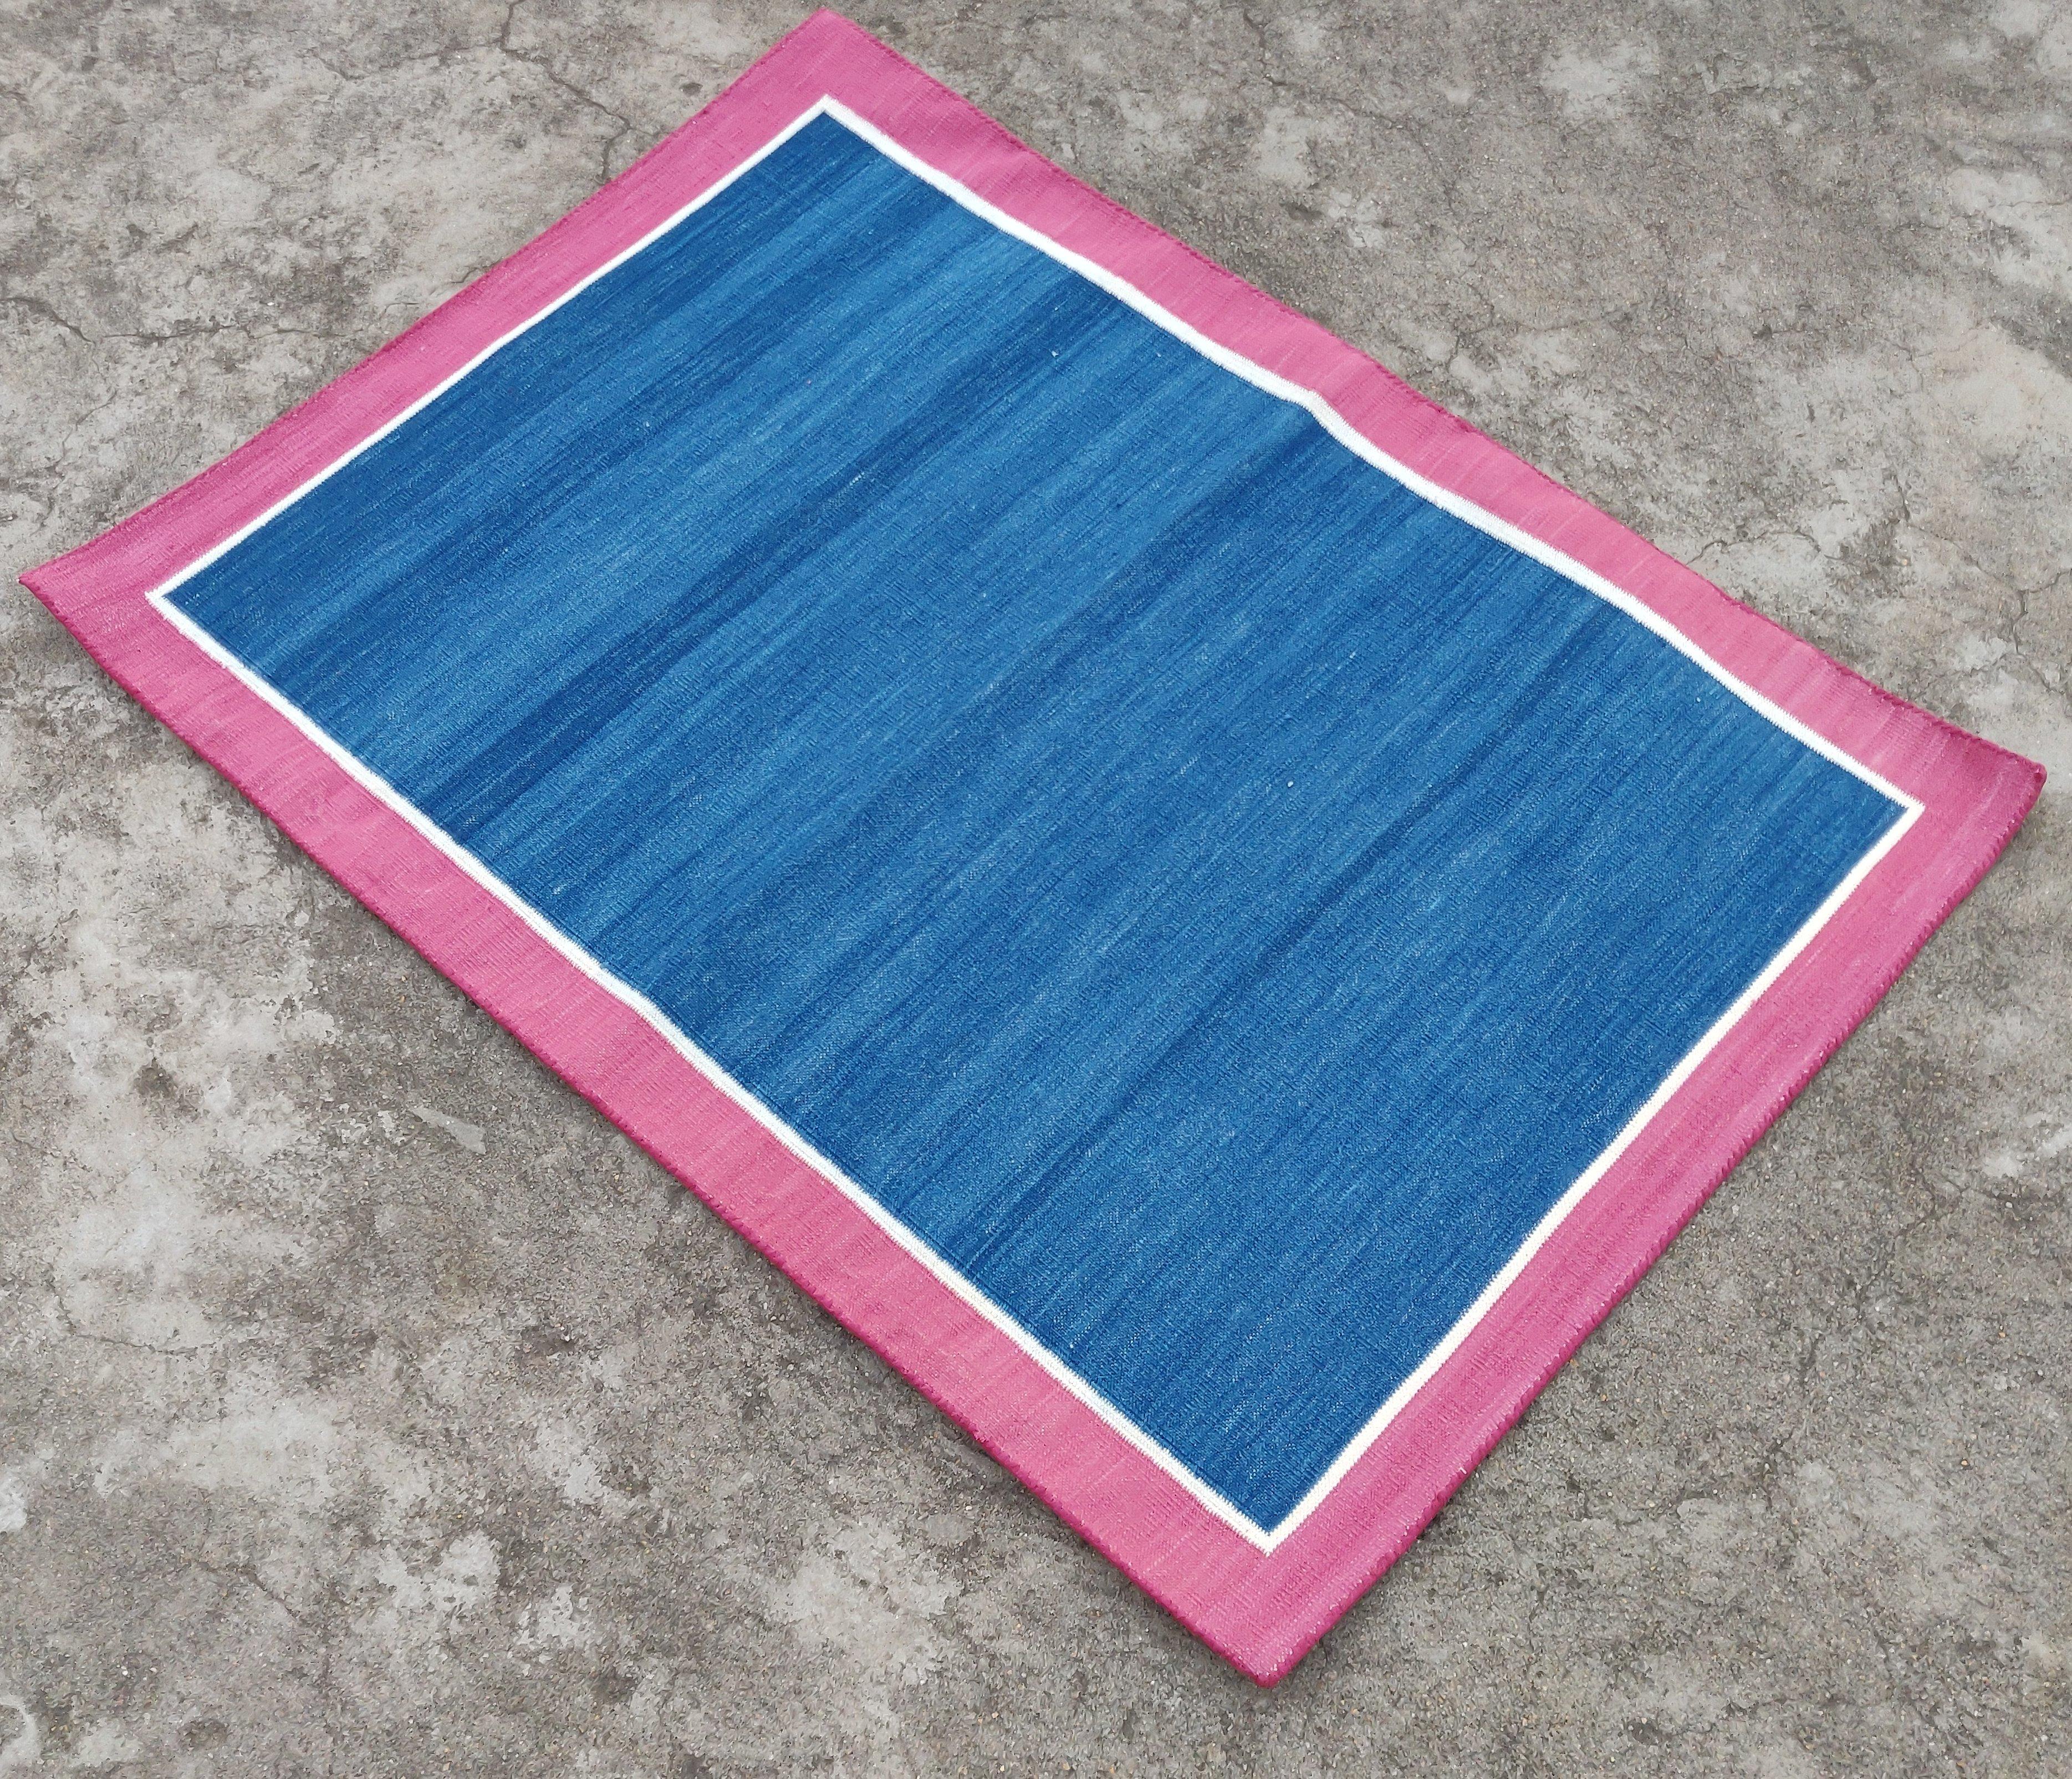 Cotton Vegetable Dyed  Indigo Blue, Cream And Raspberry Pink Bordered Indian Dhurrie Rug - 2'x3' (60x90cm) 

These special flat-weave dhurries are hand-woven with 15 ply 100% cotton yarn. Due to the special manufacturing techniques used to create